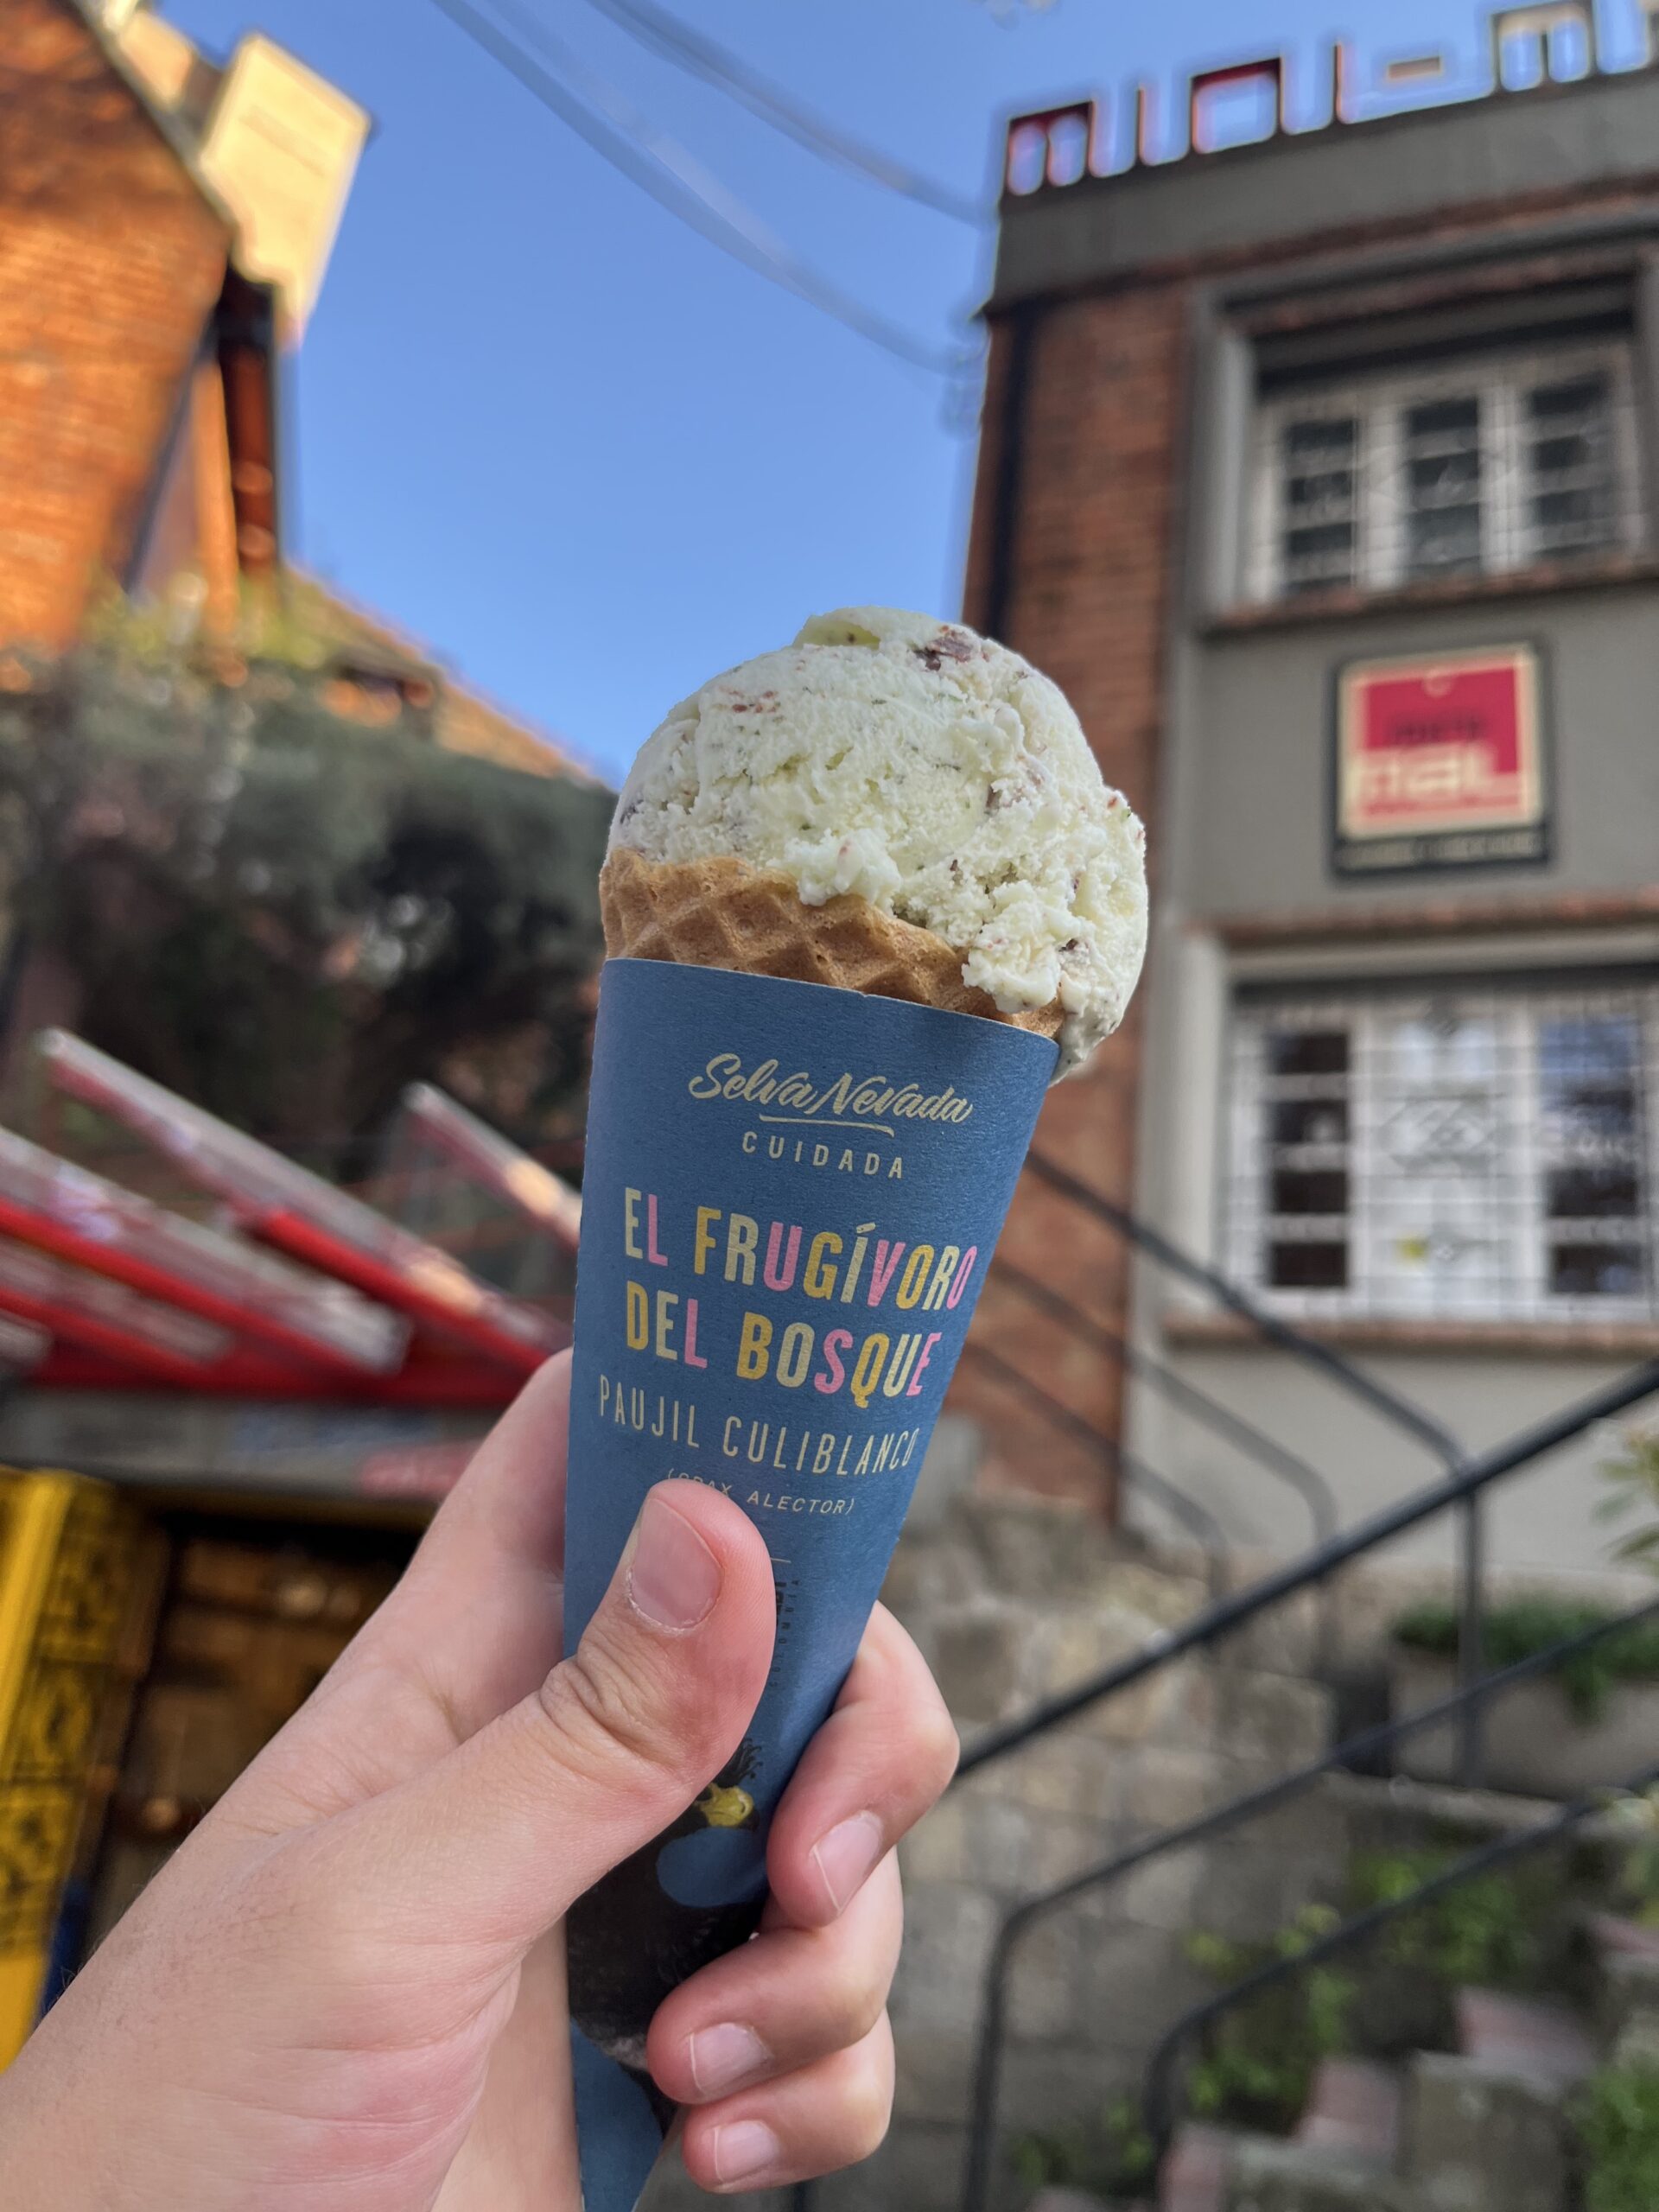 A hand holding an ice cream cone in front of a building. The cone has a blue wrapper with text in Spanish, including “El Frugívoro del Bosque.” It's one of those delightful things to do in Bogotá, making any tour of the city extra sweet.